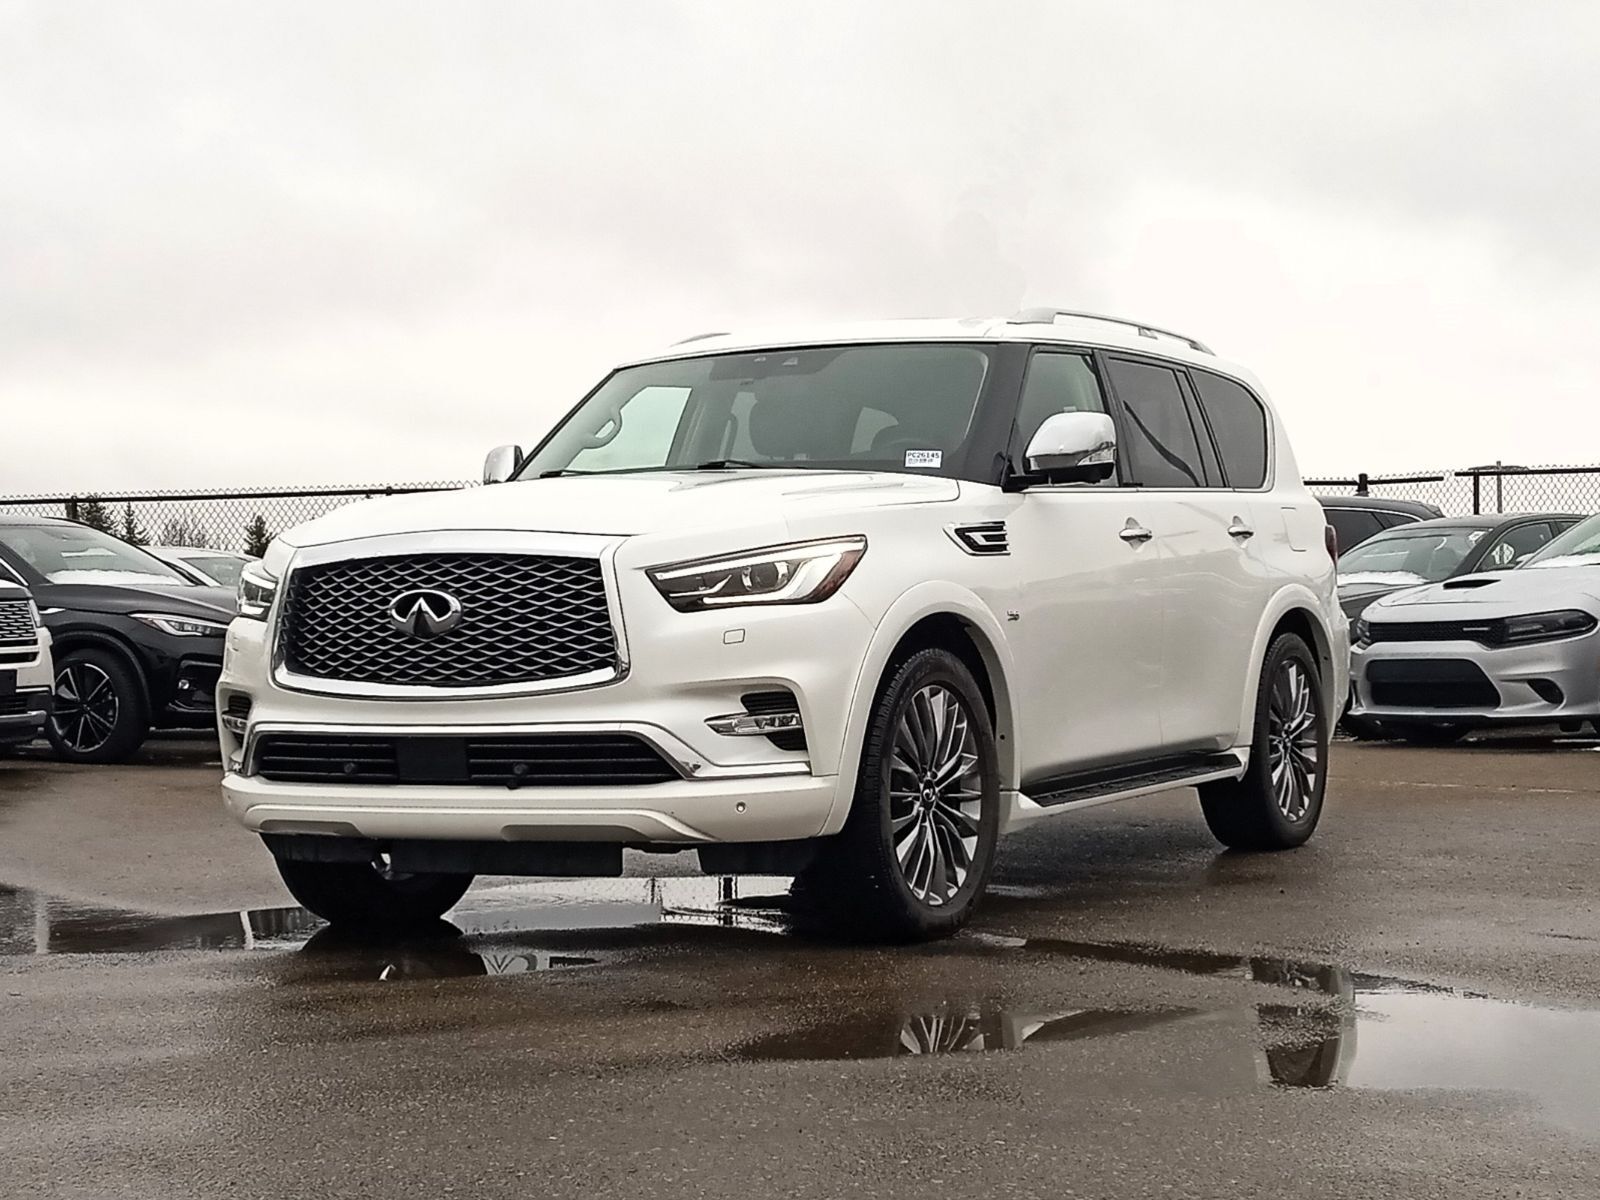 2019 Infiniti QX80 PROACTIVE, LEATHER, SUNROOF, DVD, CPO AVAIL